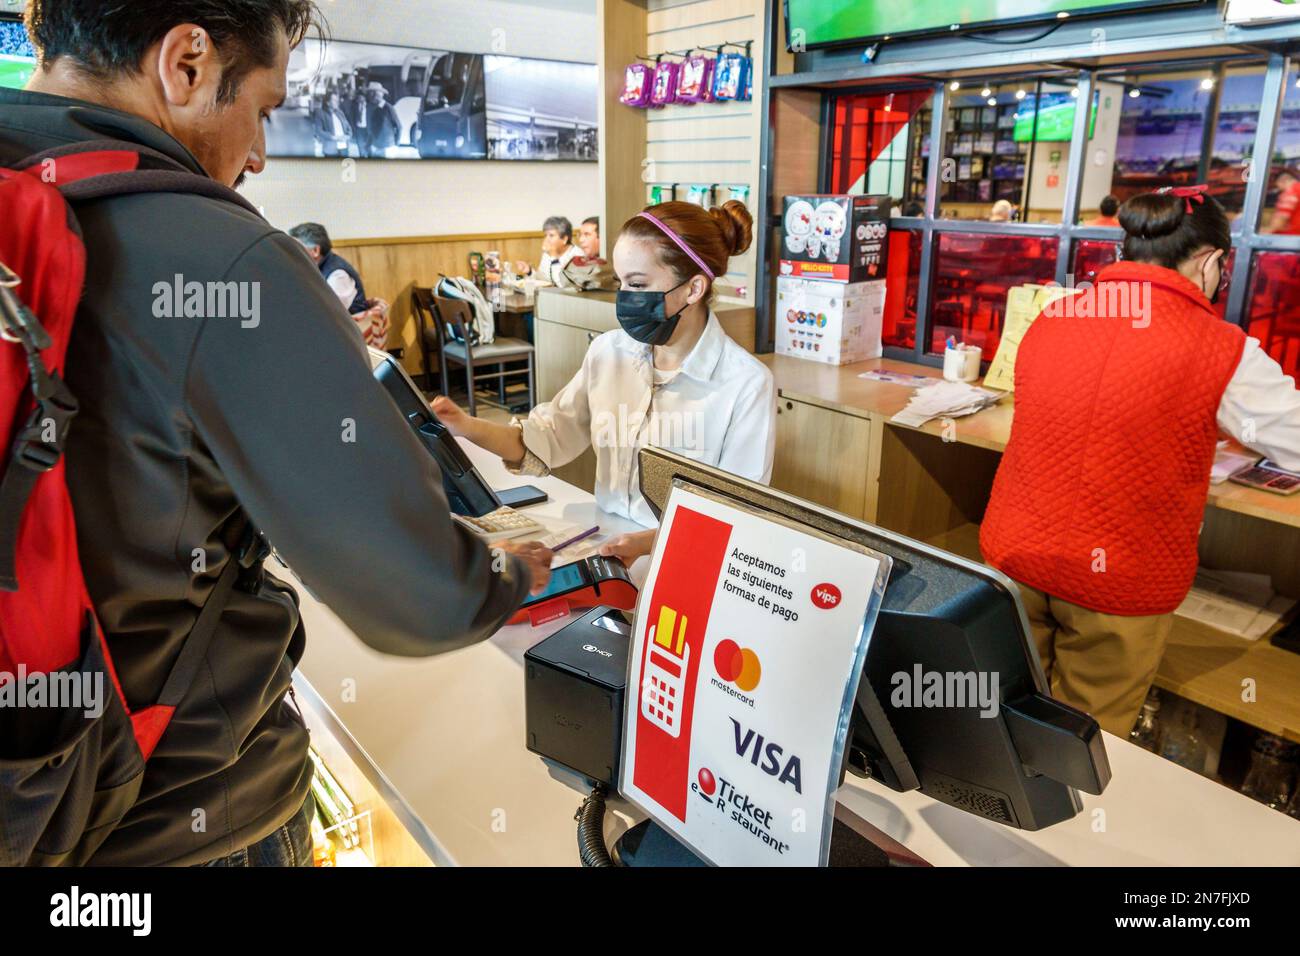 Mexico City,Central de Autobuses del Norte,Northern Bus Station,Vips cashier paying customer counter,man men male,woman women lady female,adult adults Stock Photo